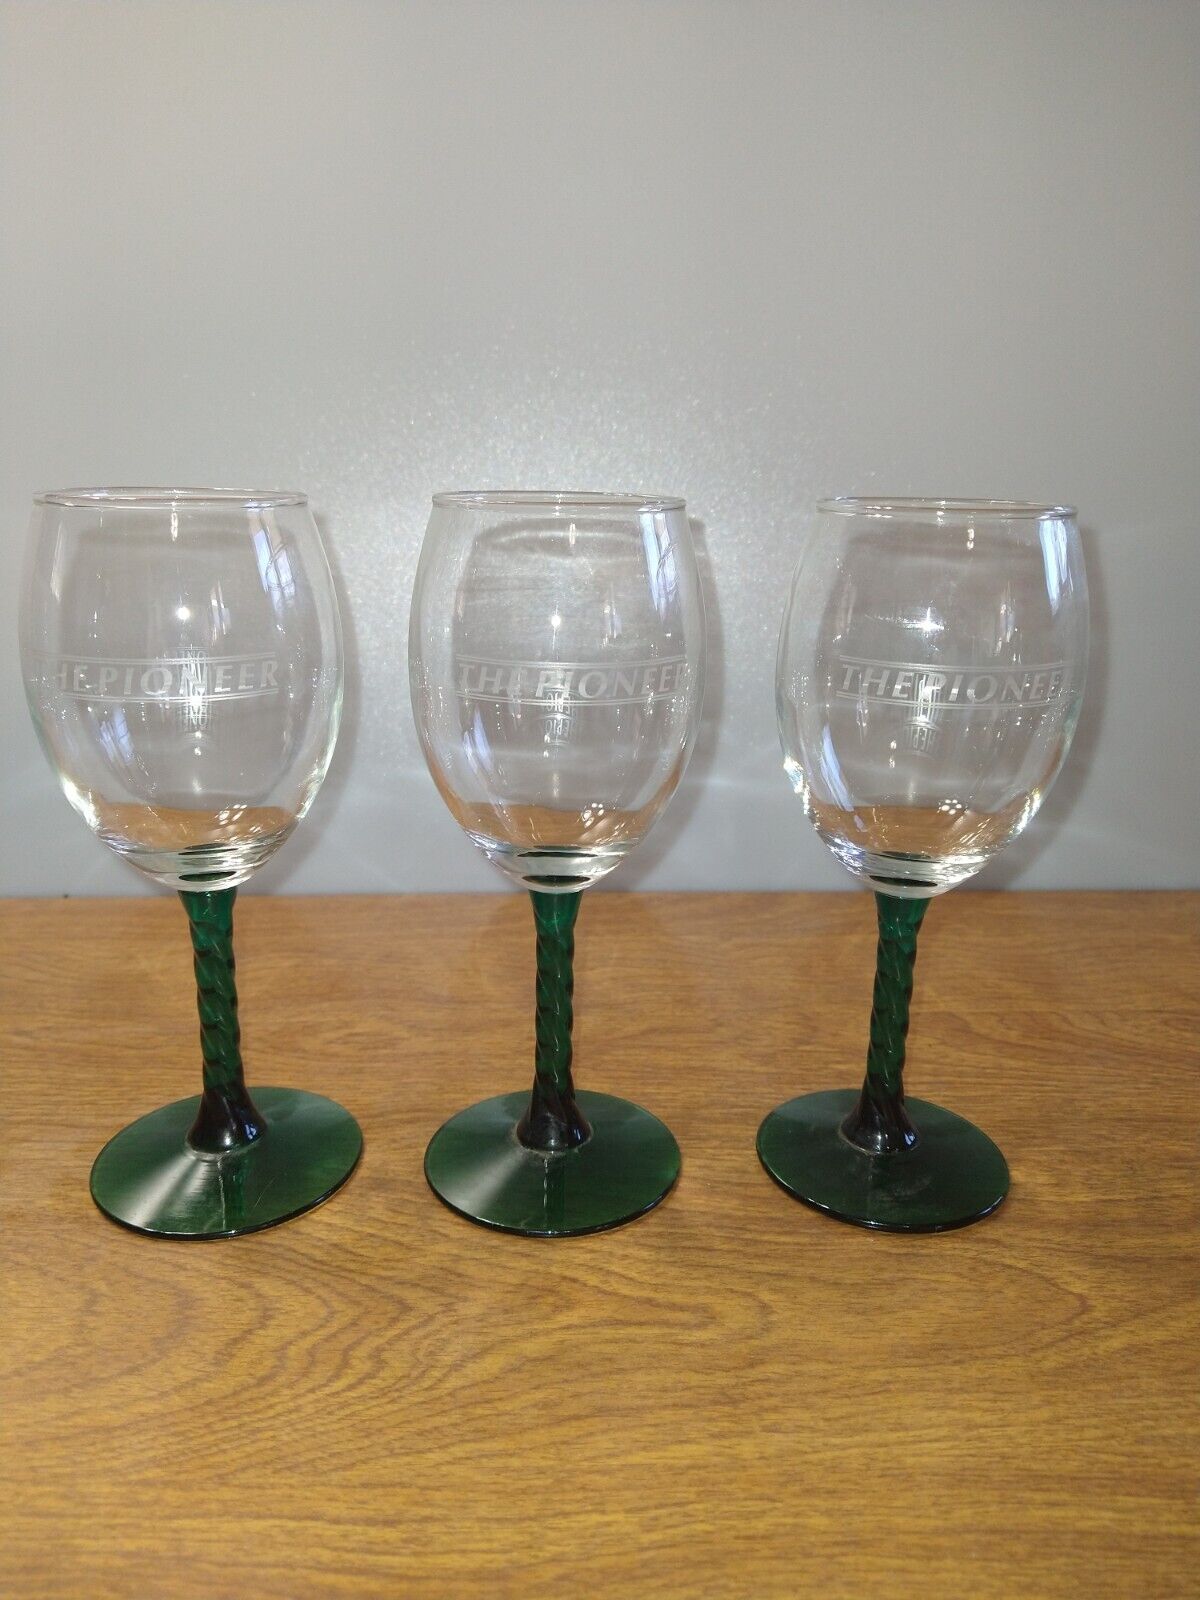 Amtrak Wine Glass Pioneer Logo With Green Twisted Stem